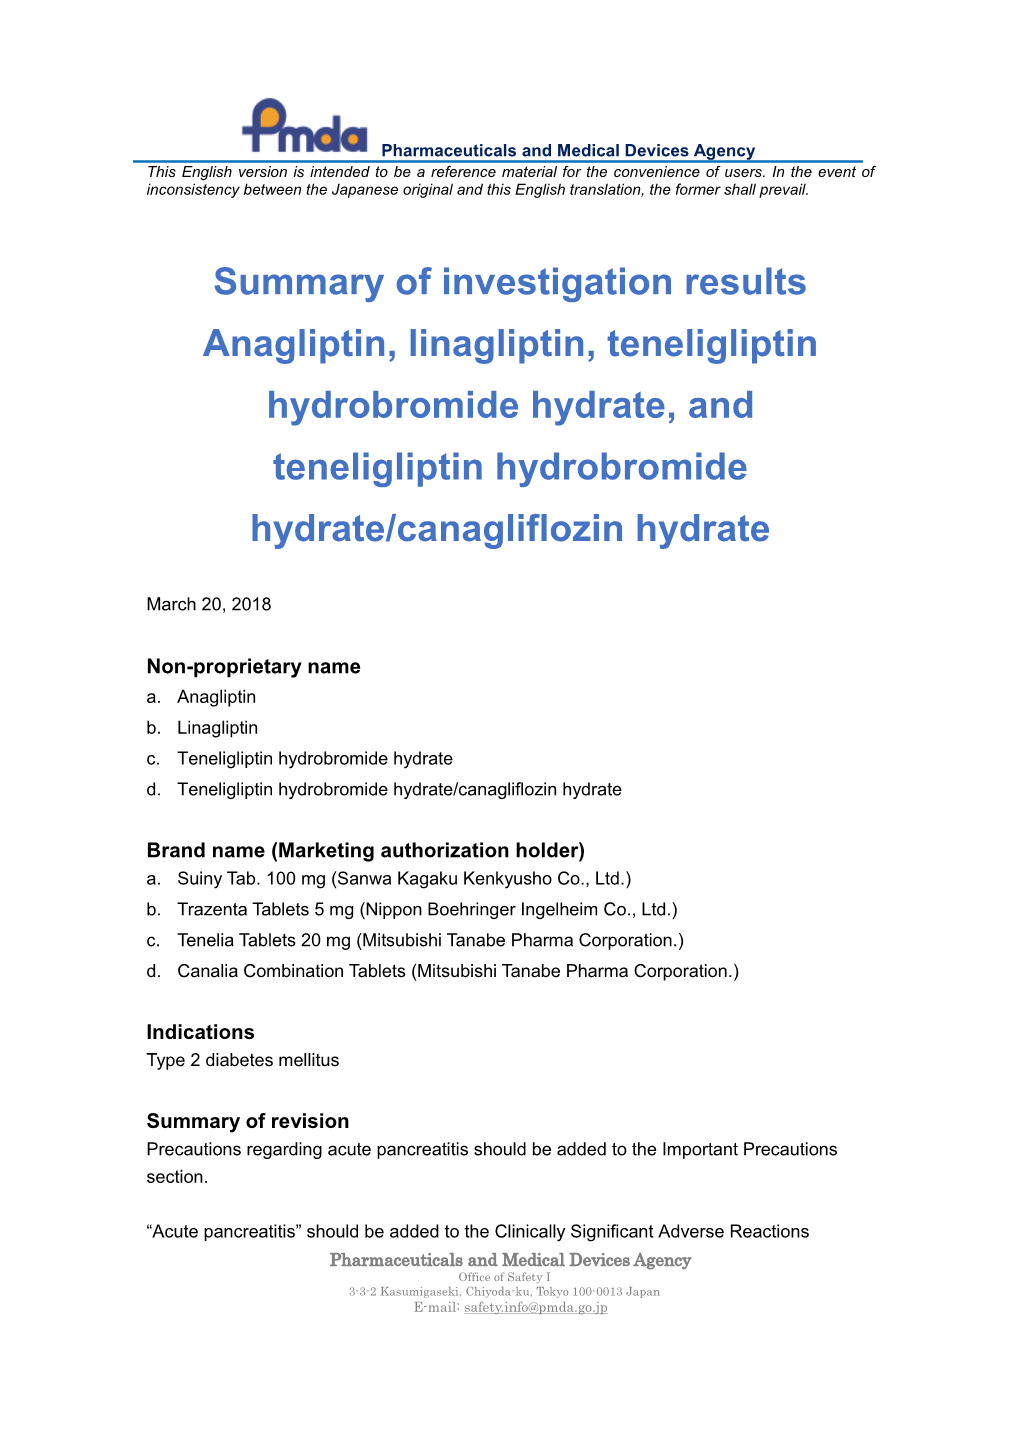 Summary of Investigation Results Anagliptin, Linagliptin, Teneligliptin Hydrobromide Hydrate, and Teneligliptin Hydrobromide Hydrate/Canagliflozin Hydrate